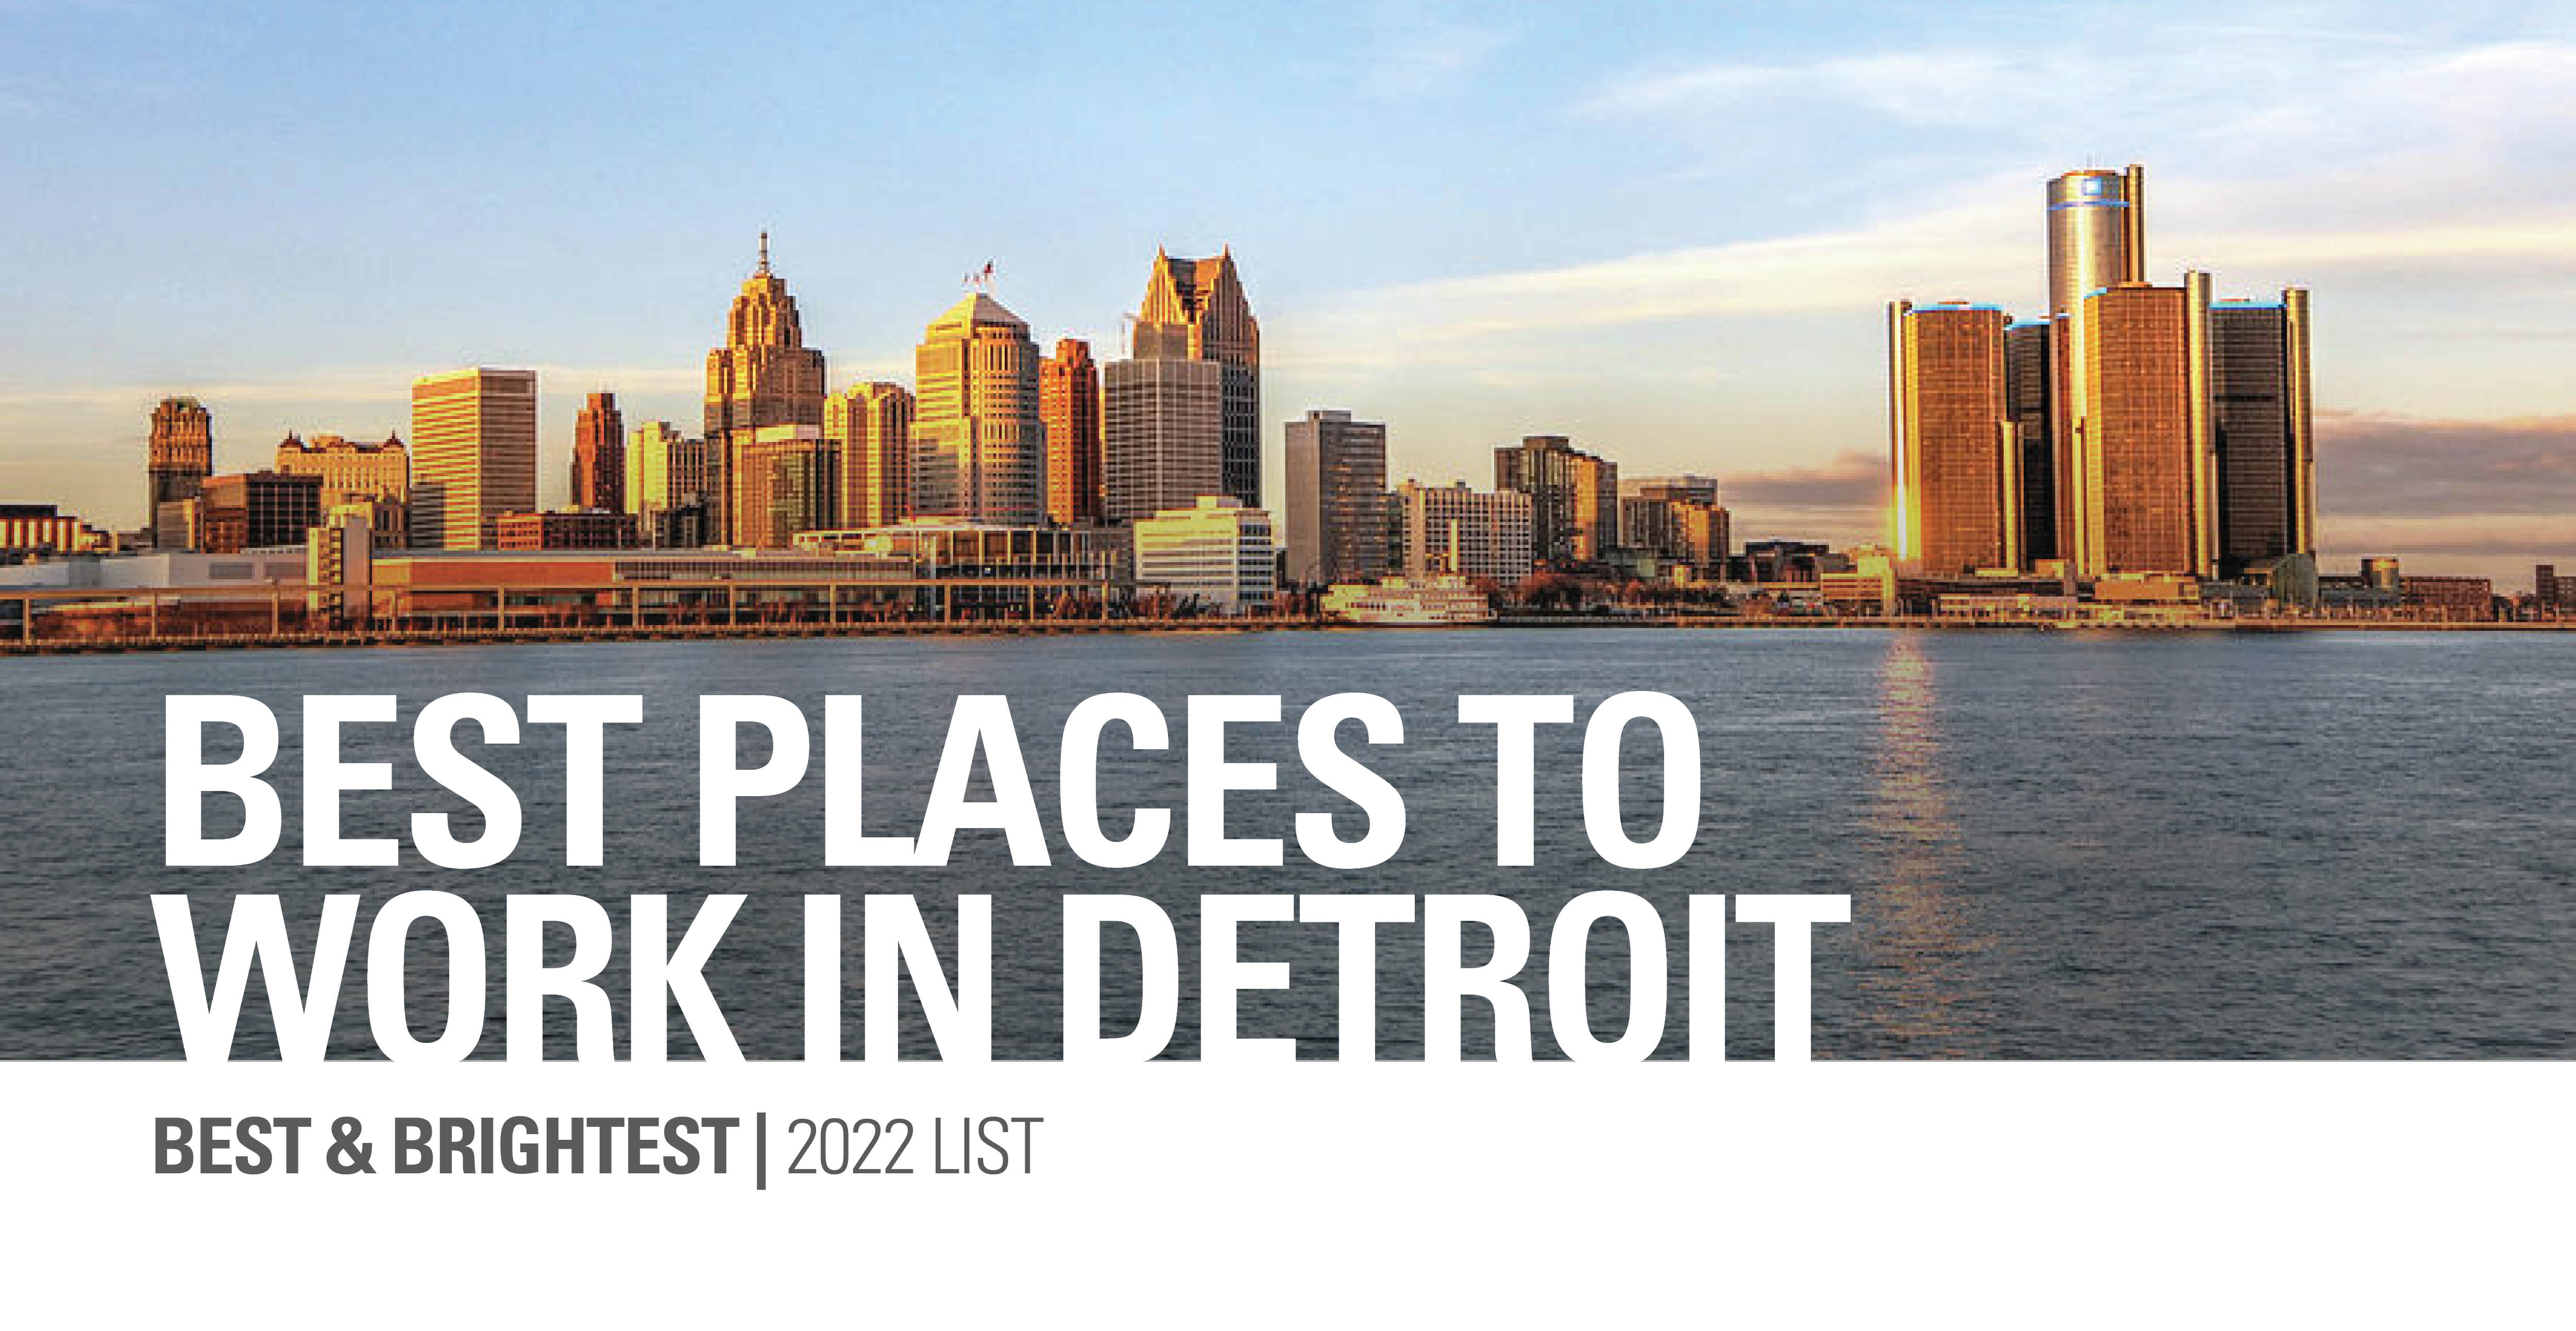 /HED%20named%20among%20the%20Best%20%26%20Brightest%20Places%20to%20Work%20in%20Detroit%21